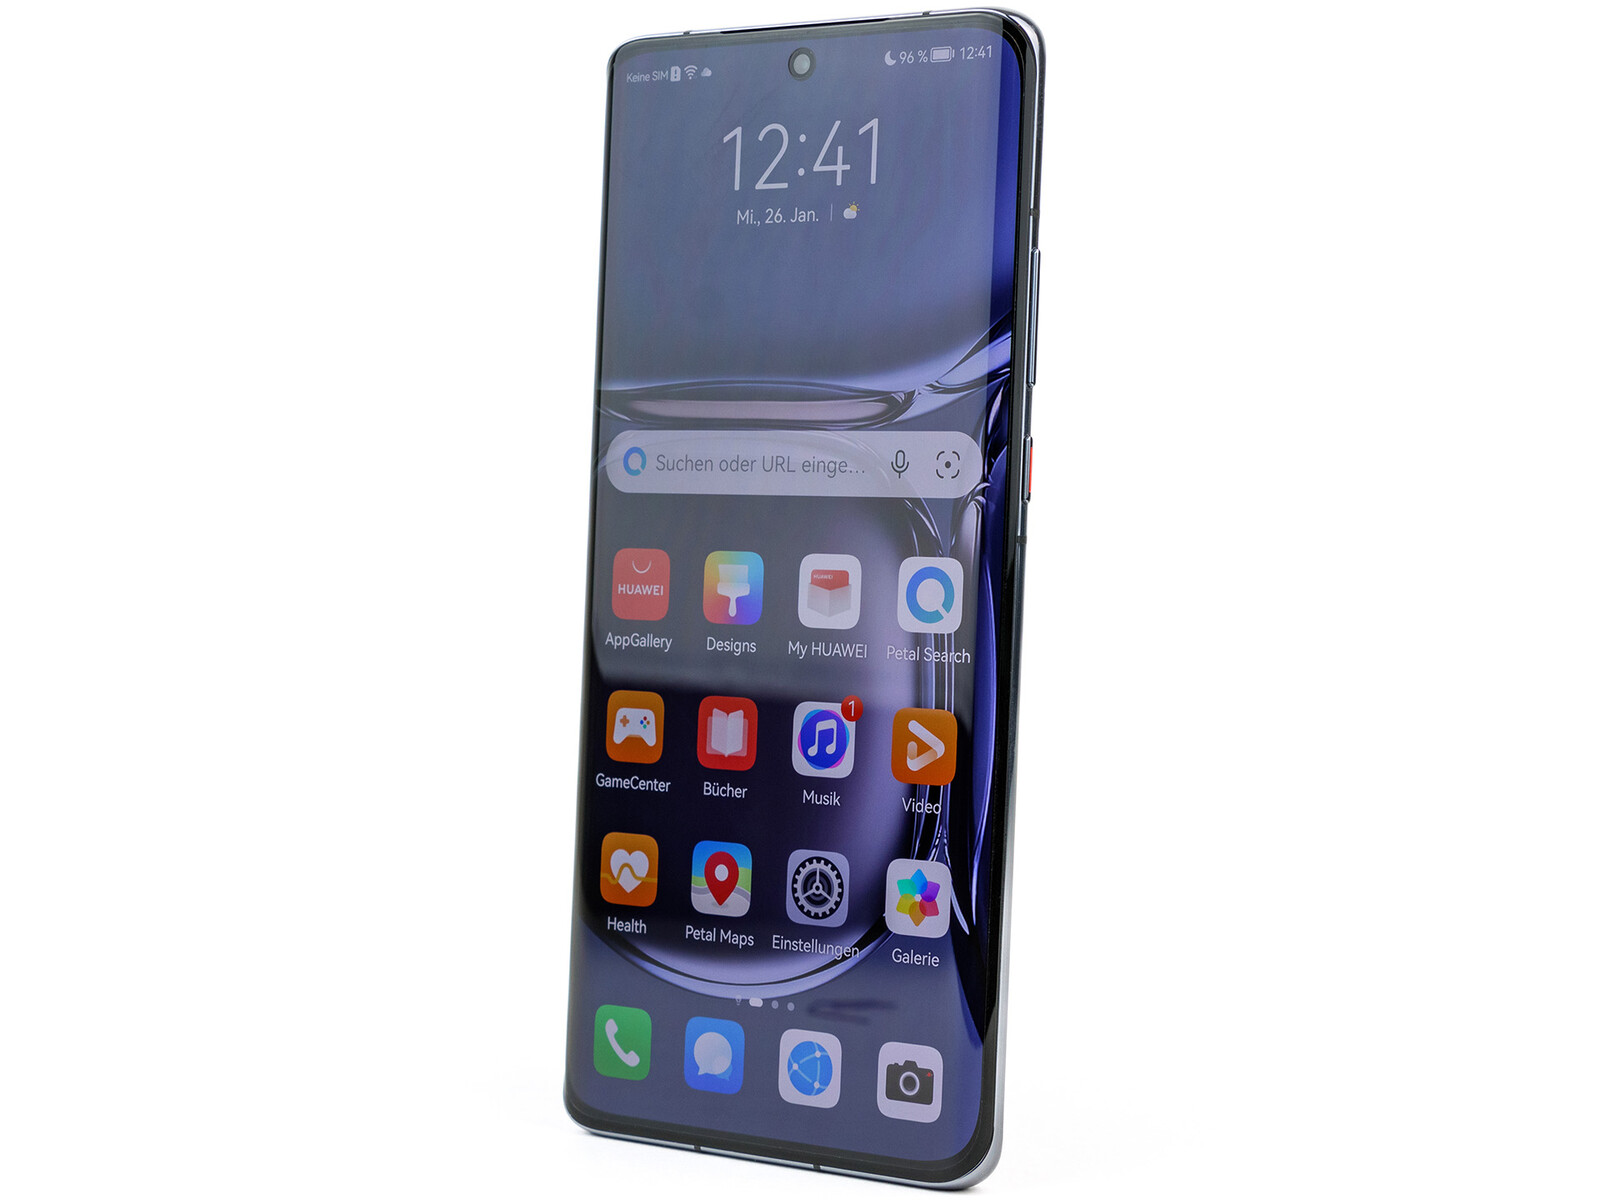 Huawei P50 Pro Technical Specifications